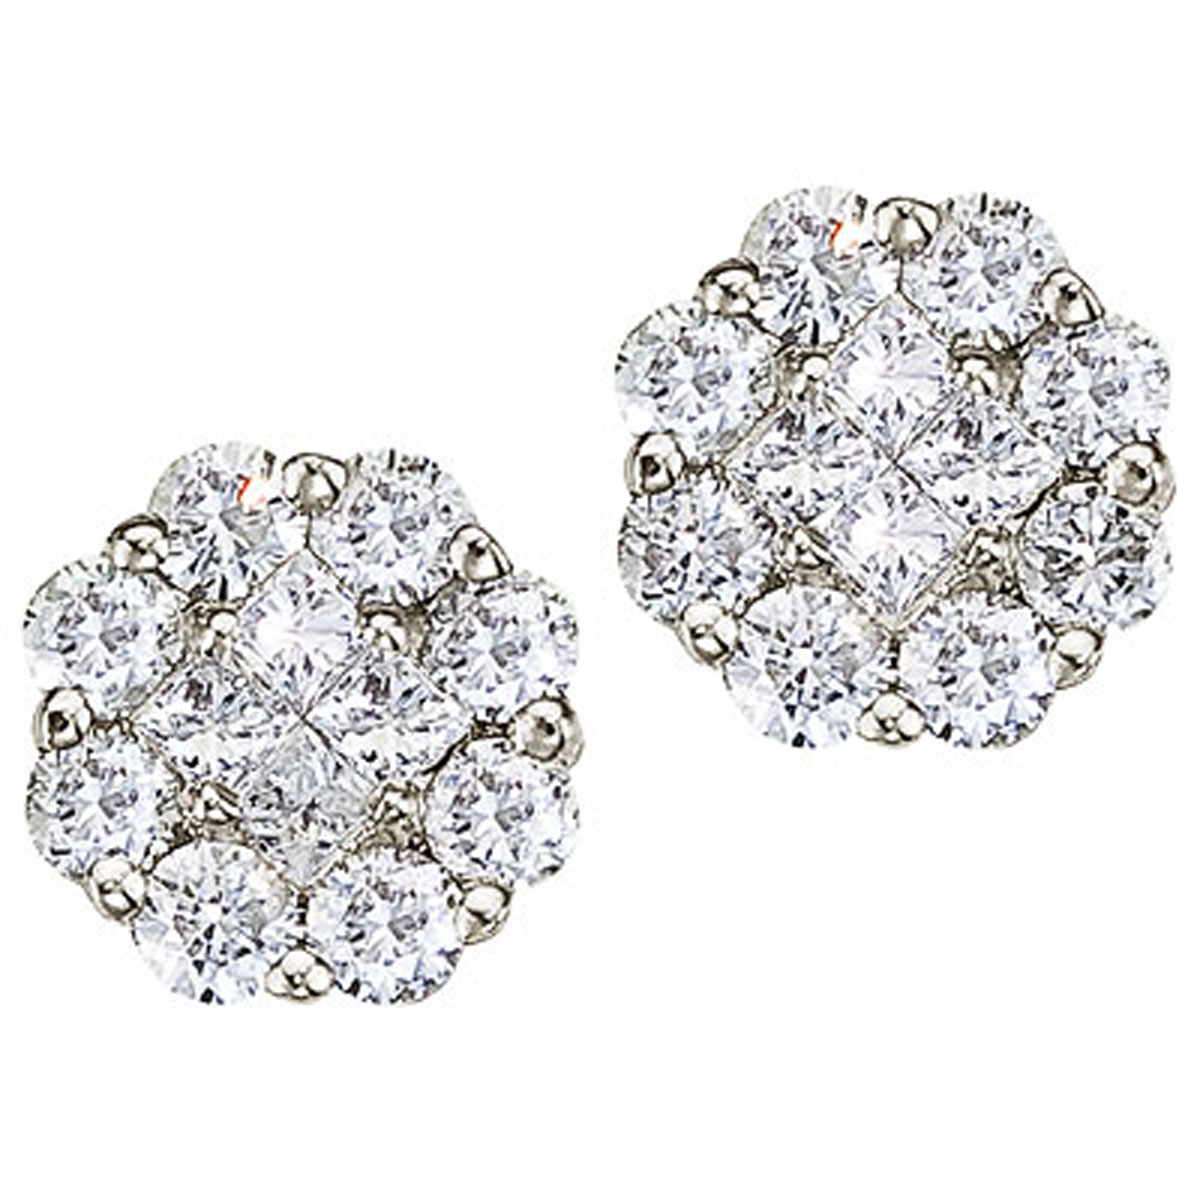 JCX2480: Gorgeous 14k white gold earrings with .54 total carats of shimmering genuine diamonds. Clustaires give all the sparkling elegence of a solitaire at a fraction of the price.